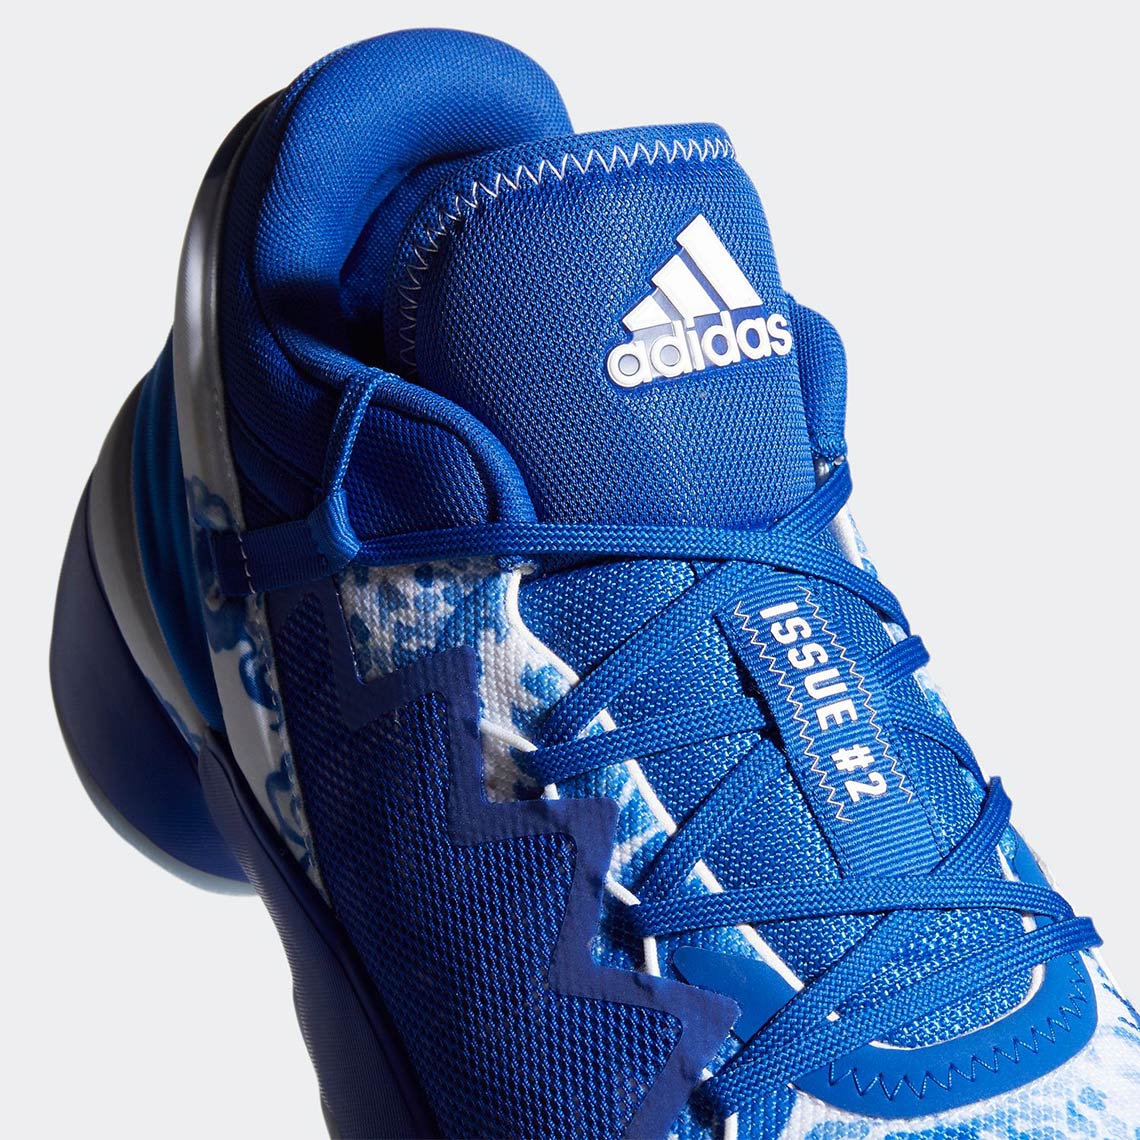 Adidas Don Issue 2 Royal Blue Fx7426 5